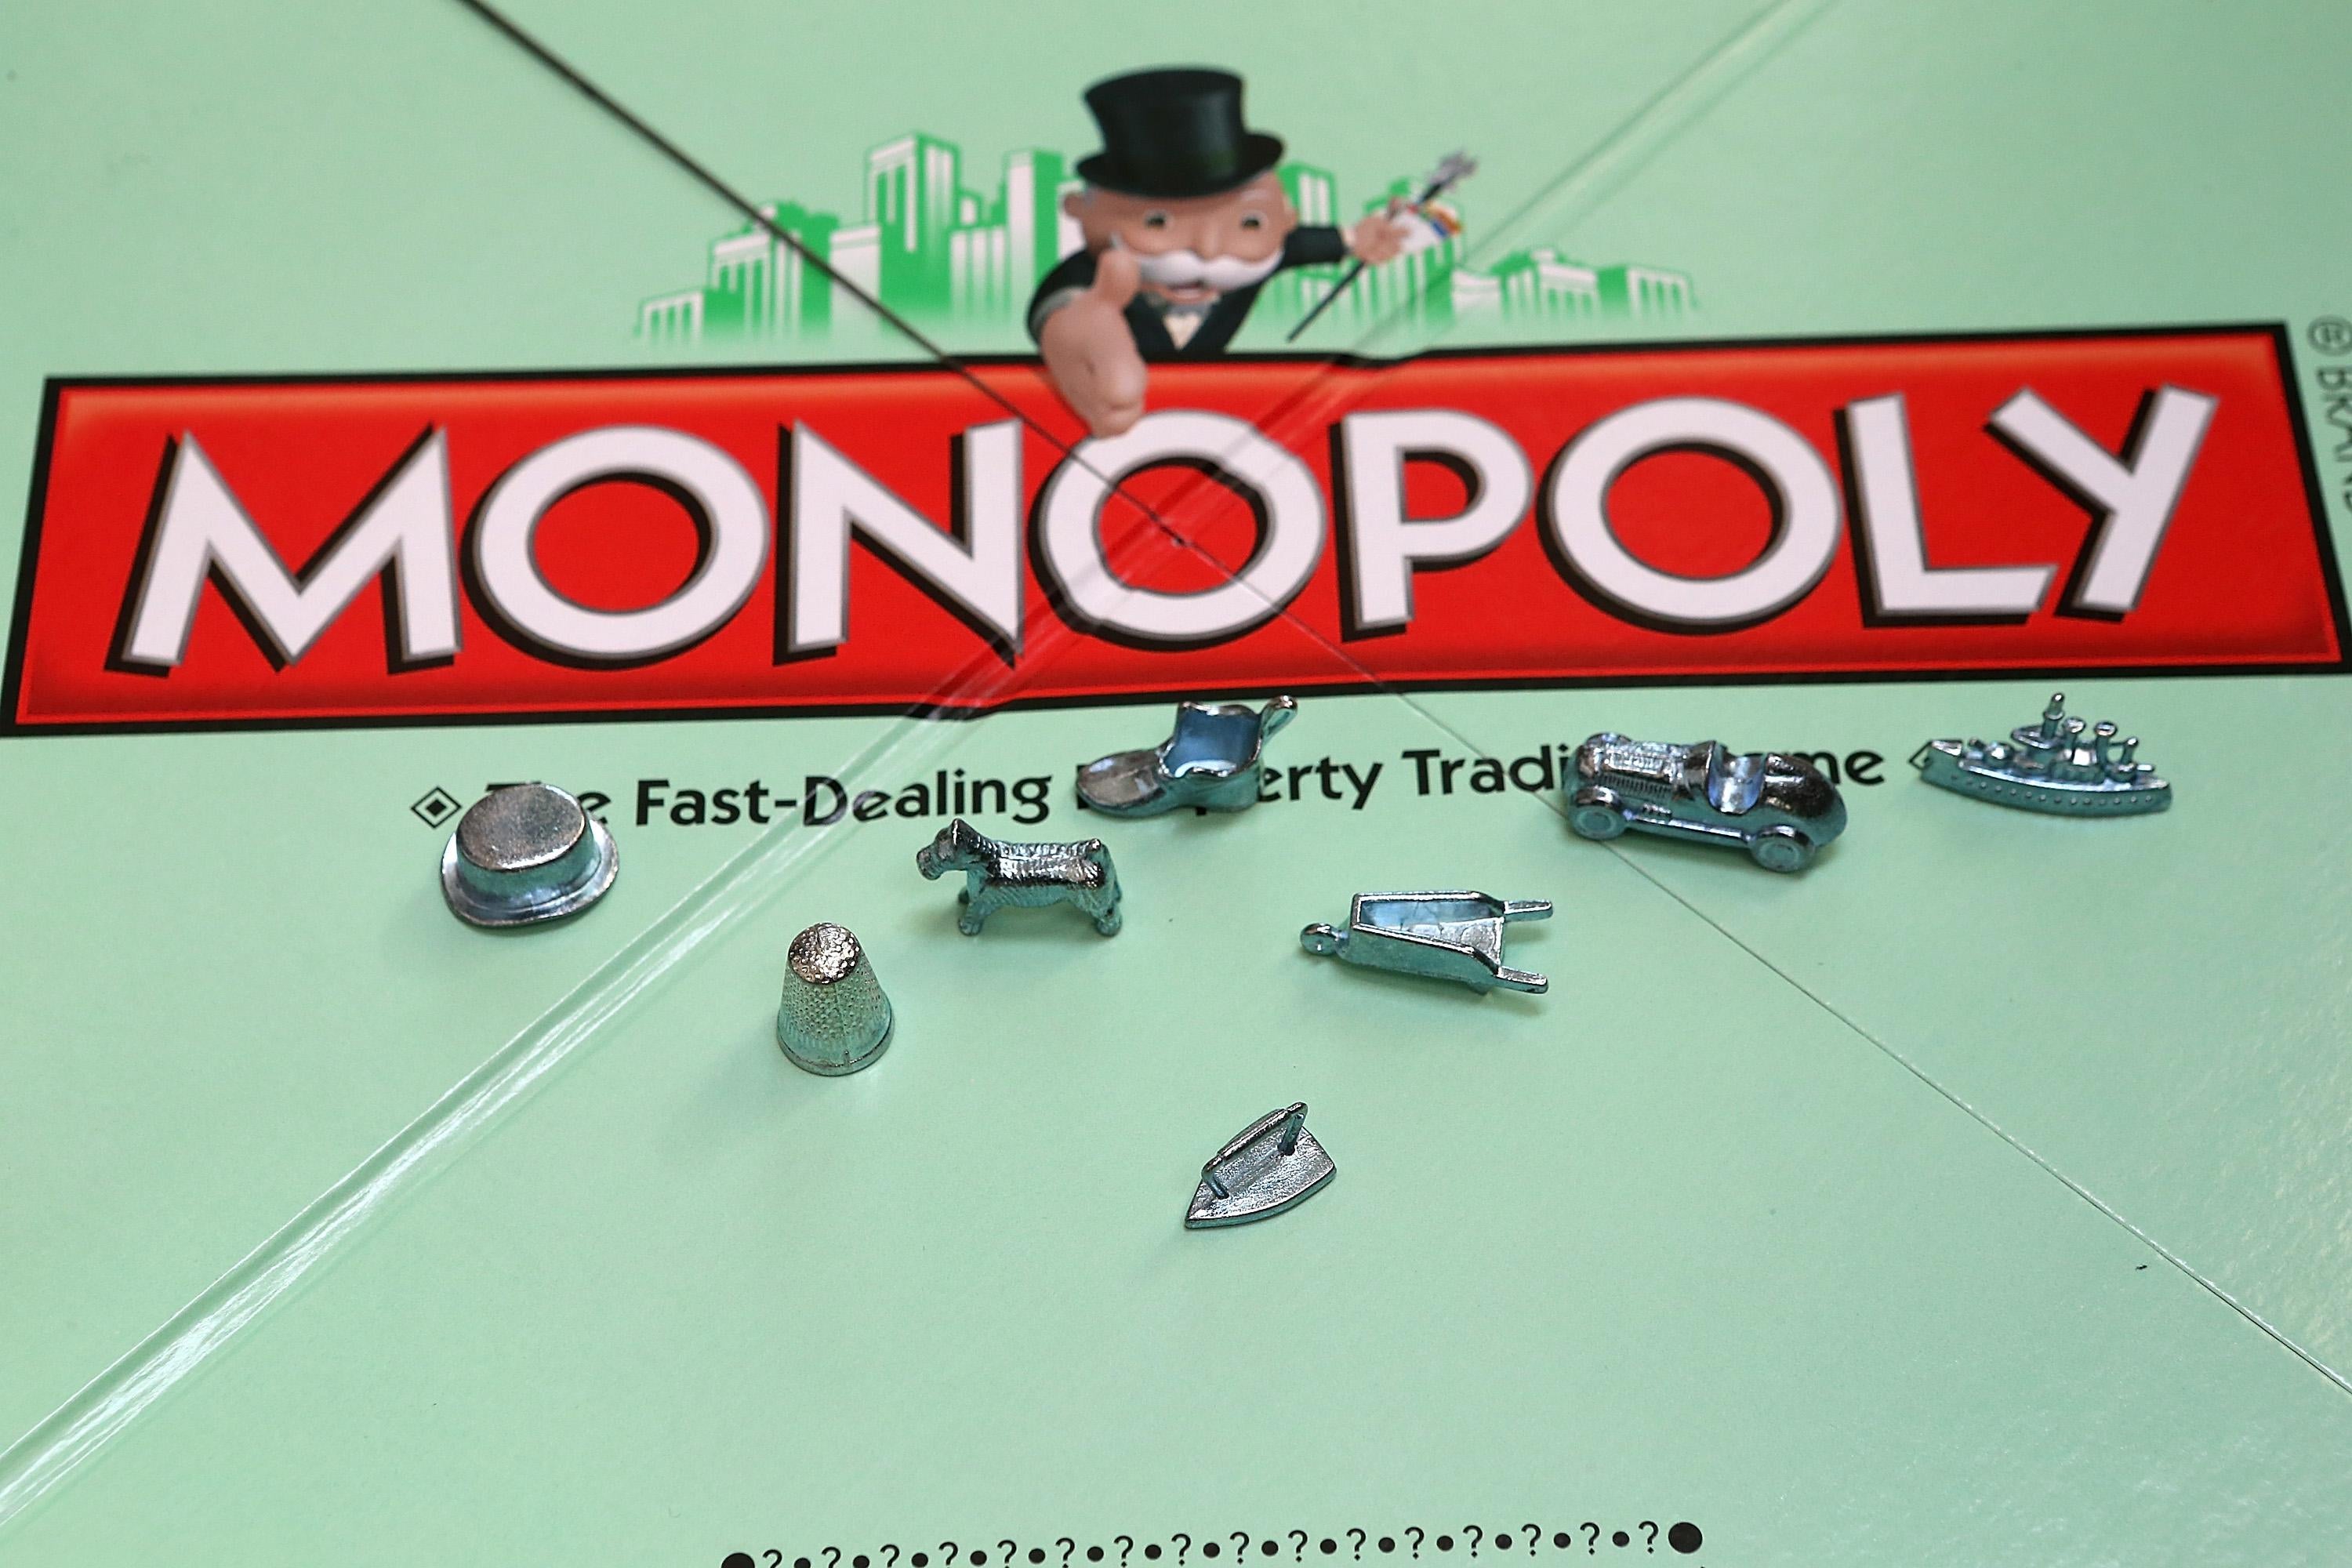 A traditional monopoly board with some of the game's famous tokens.